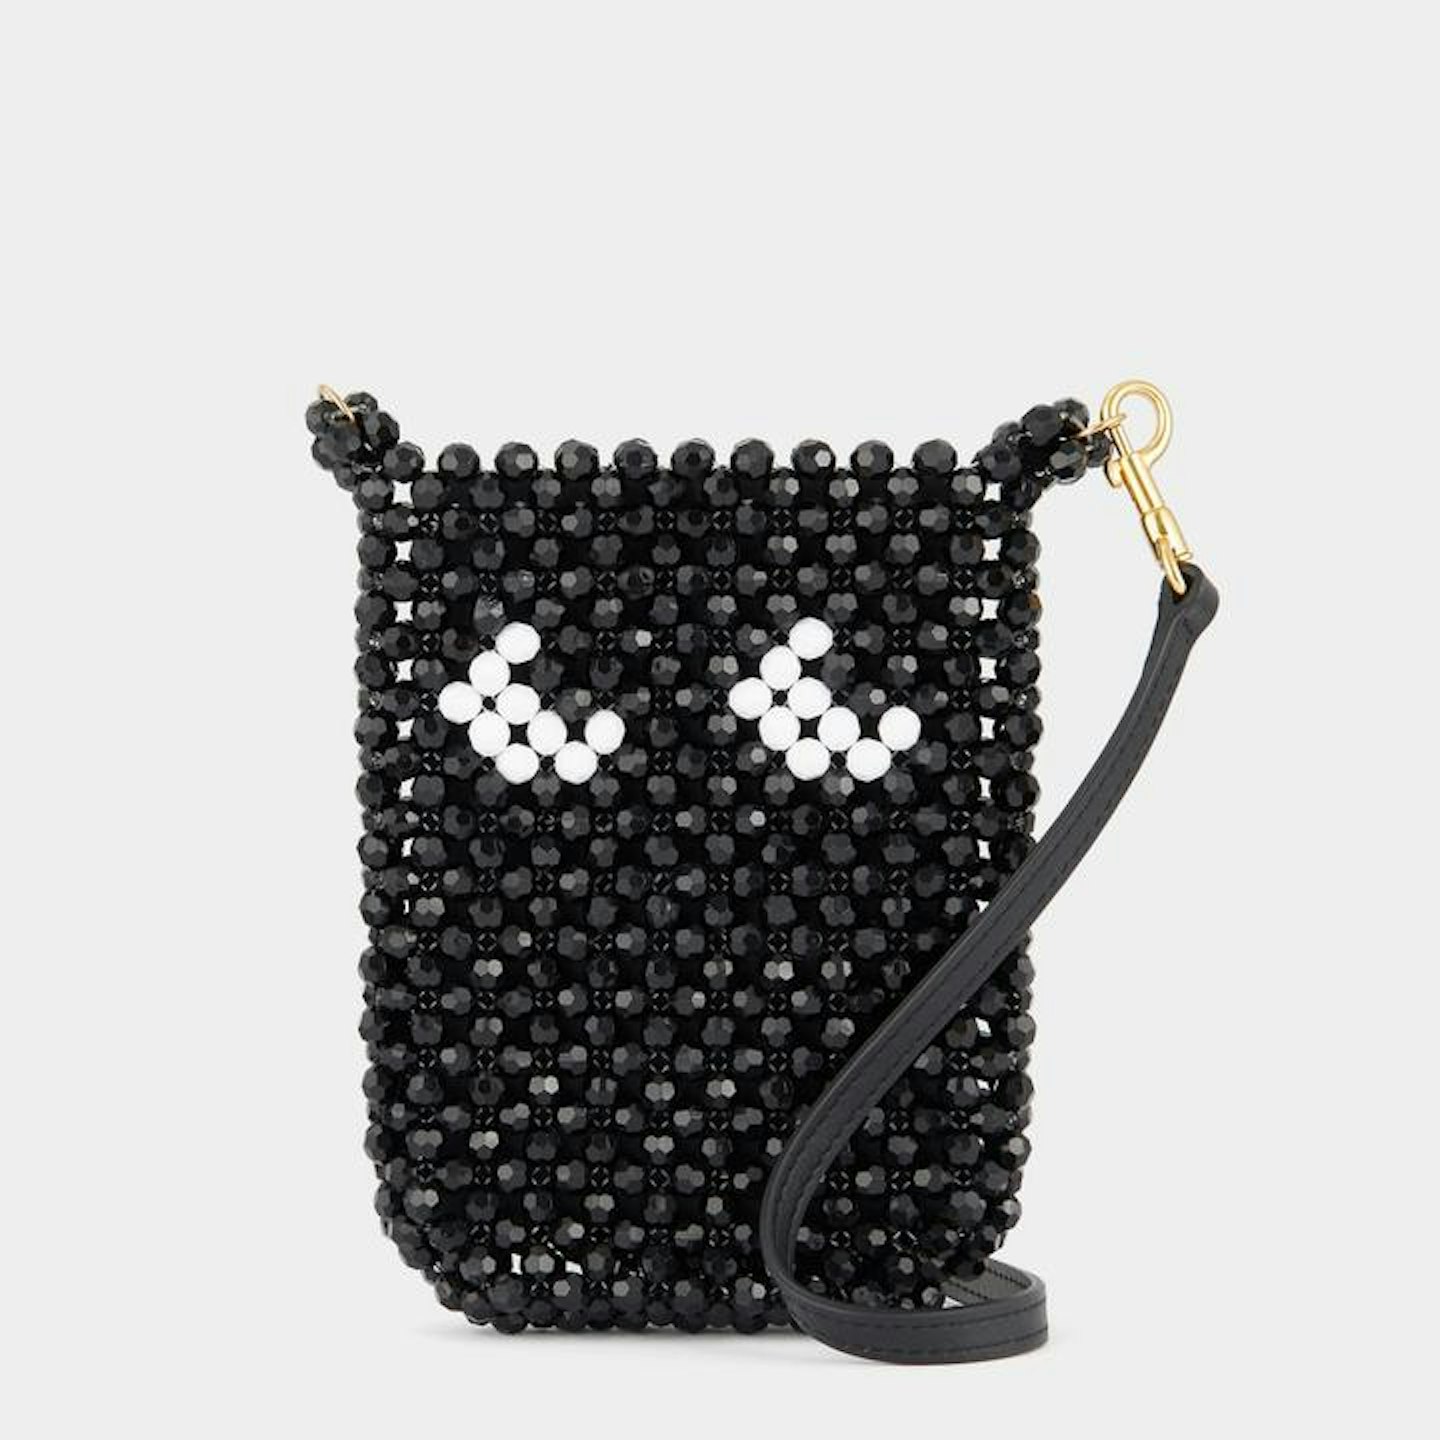 Anya Hindmarch,Beads Eyes Pouch on Strap, £350